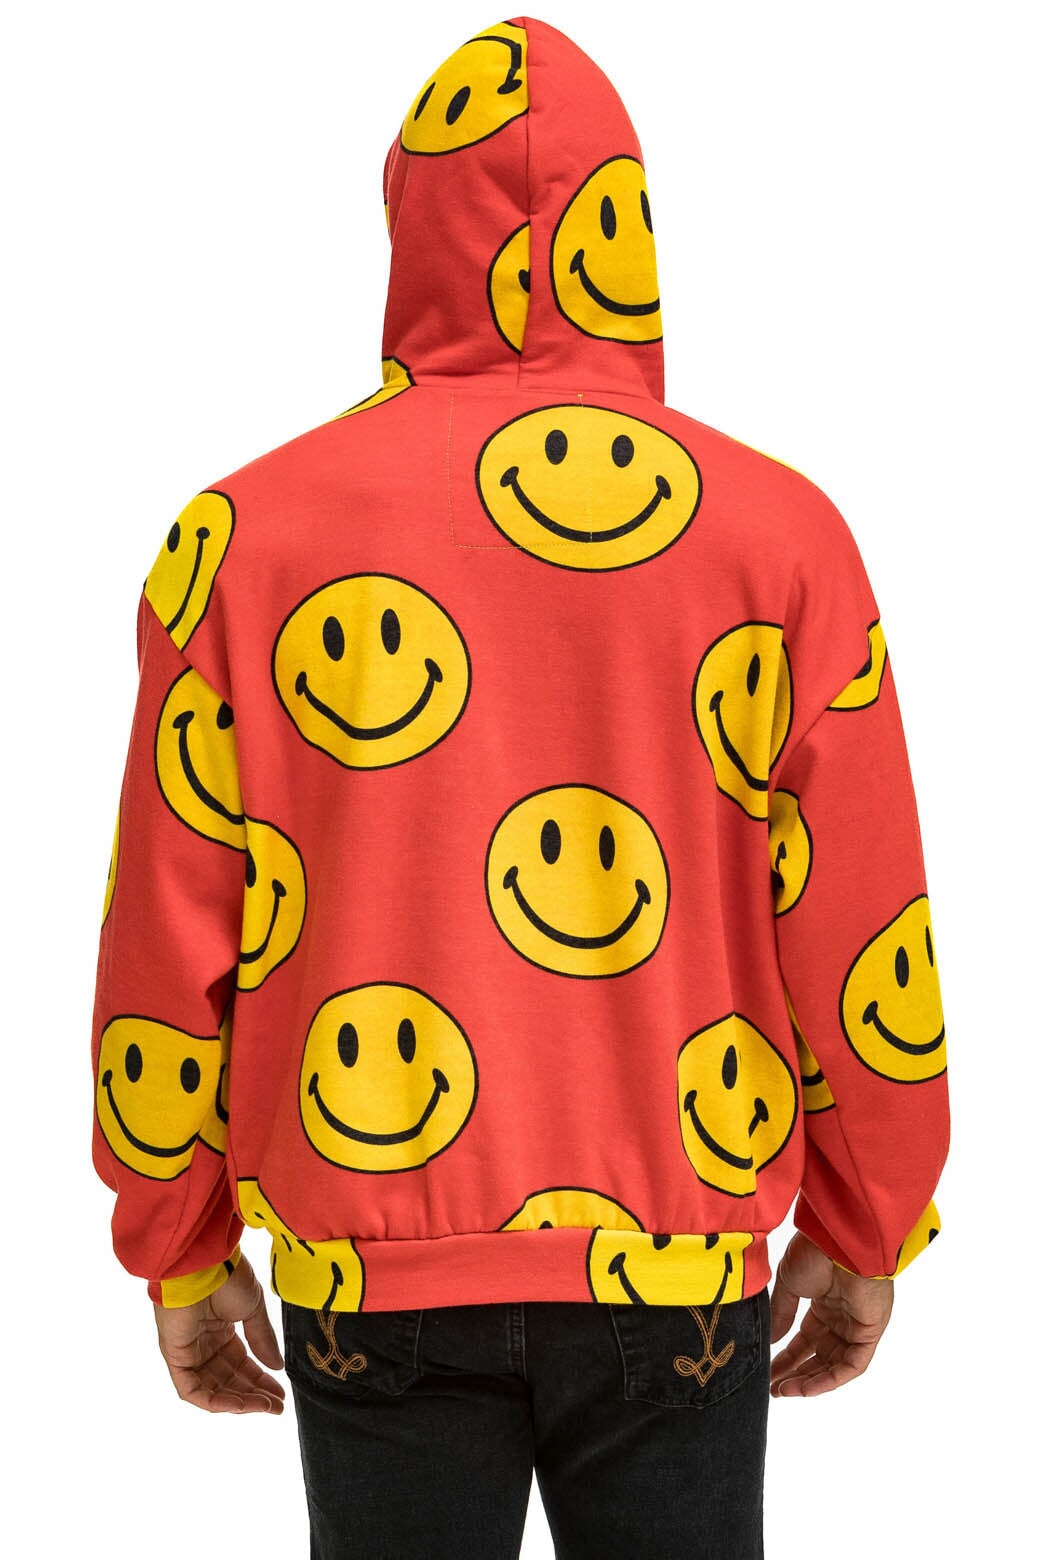 You are Loved' Happy Face Hoodie - Red with Neon Pink – The Shop